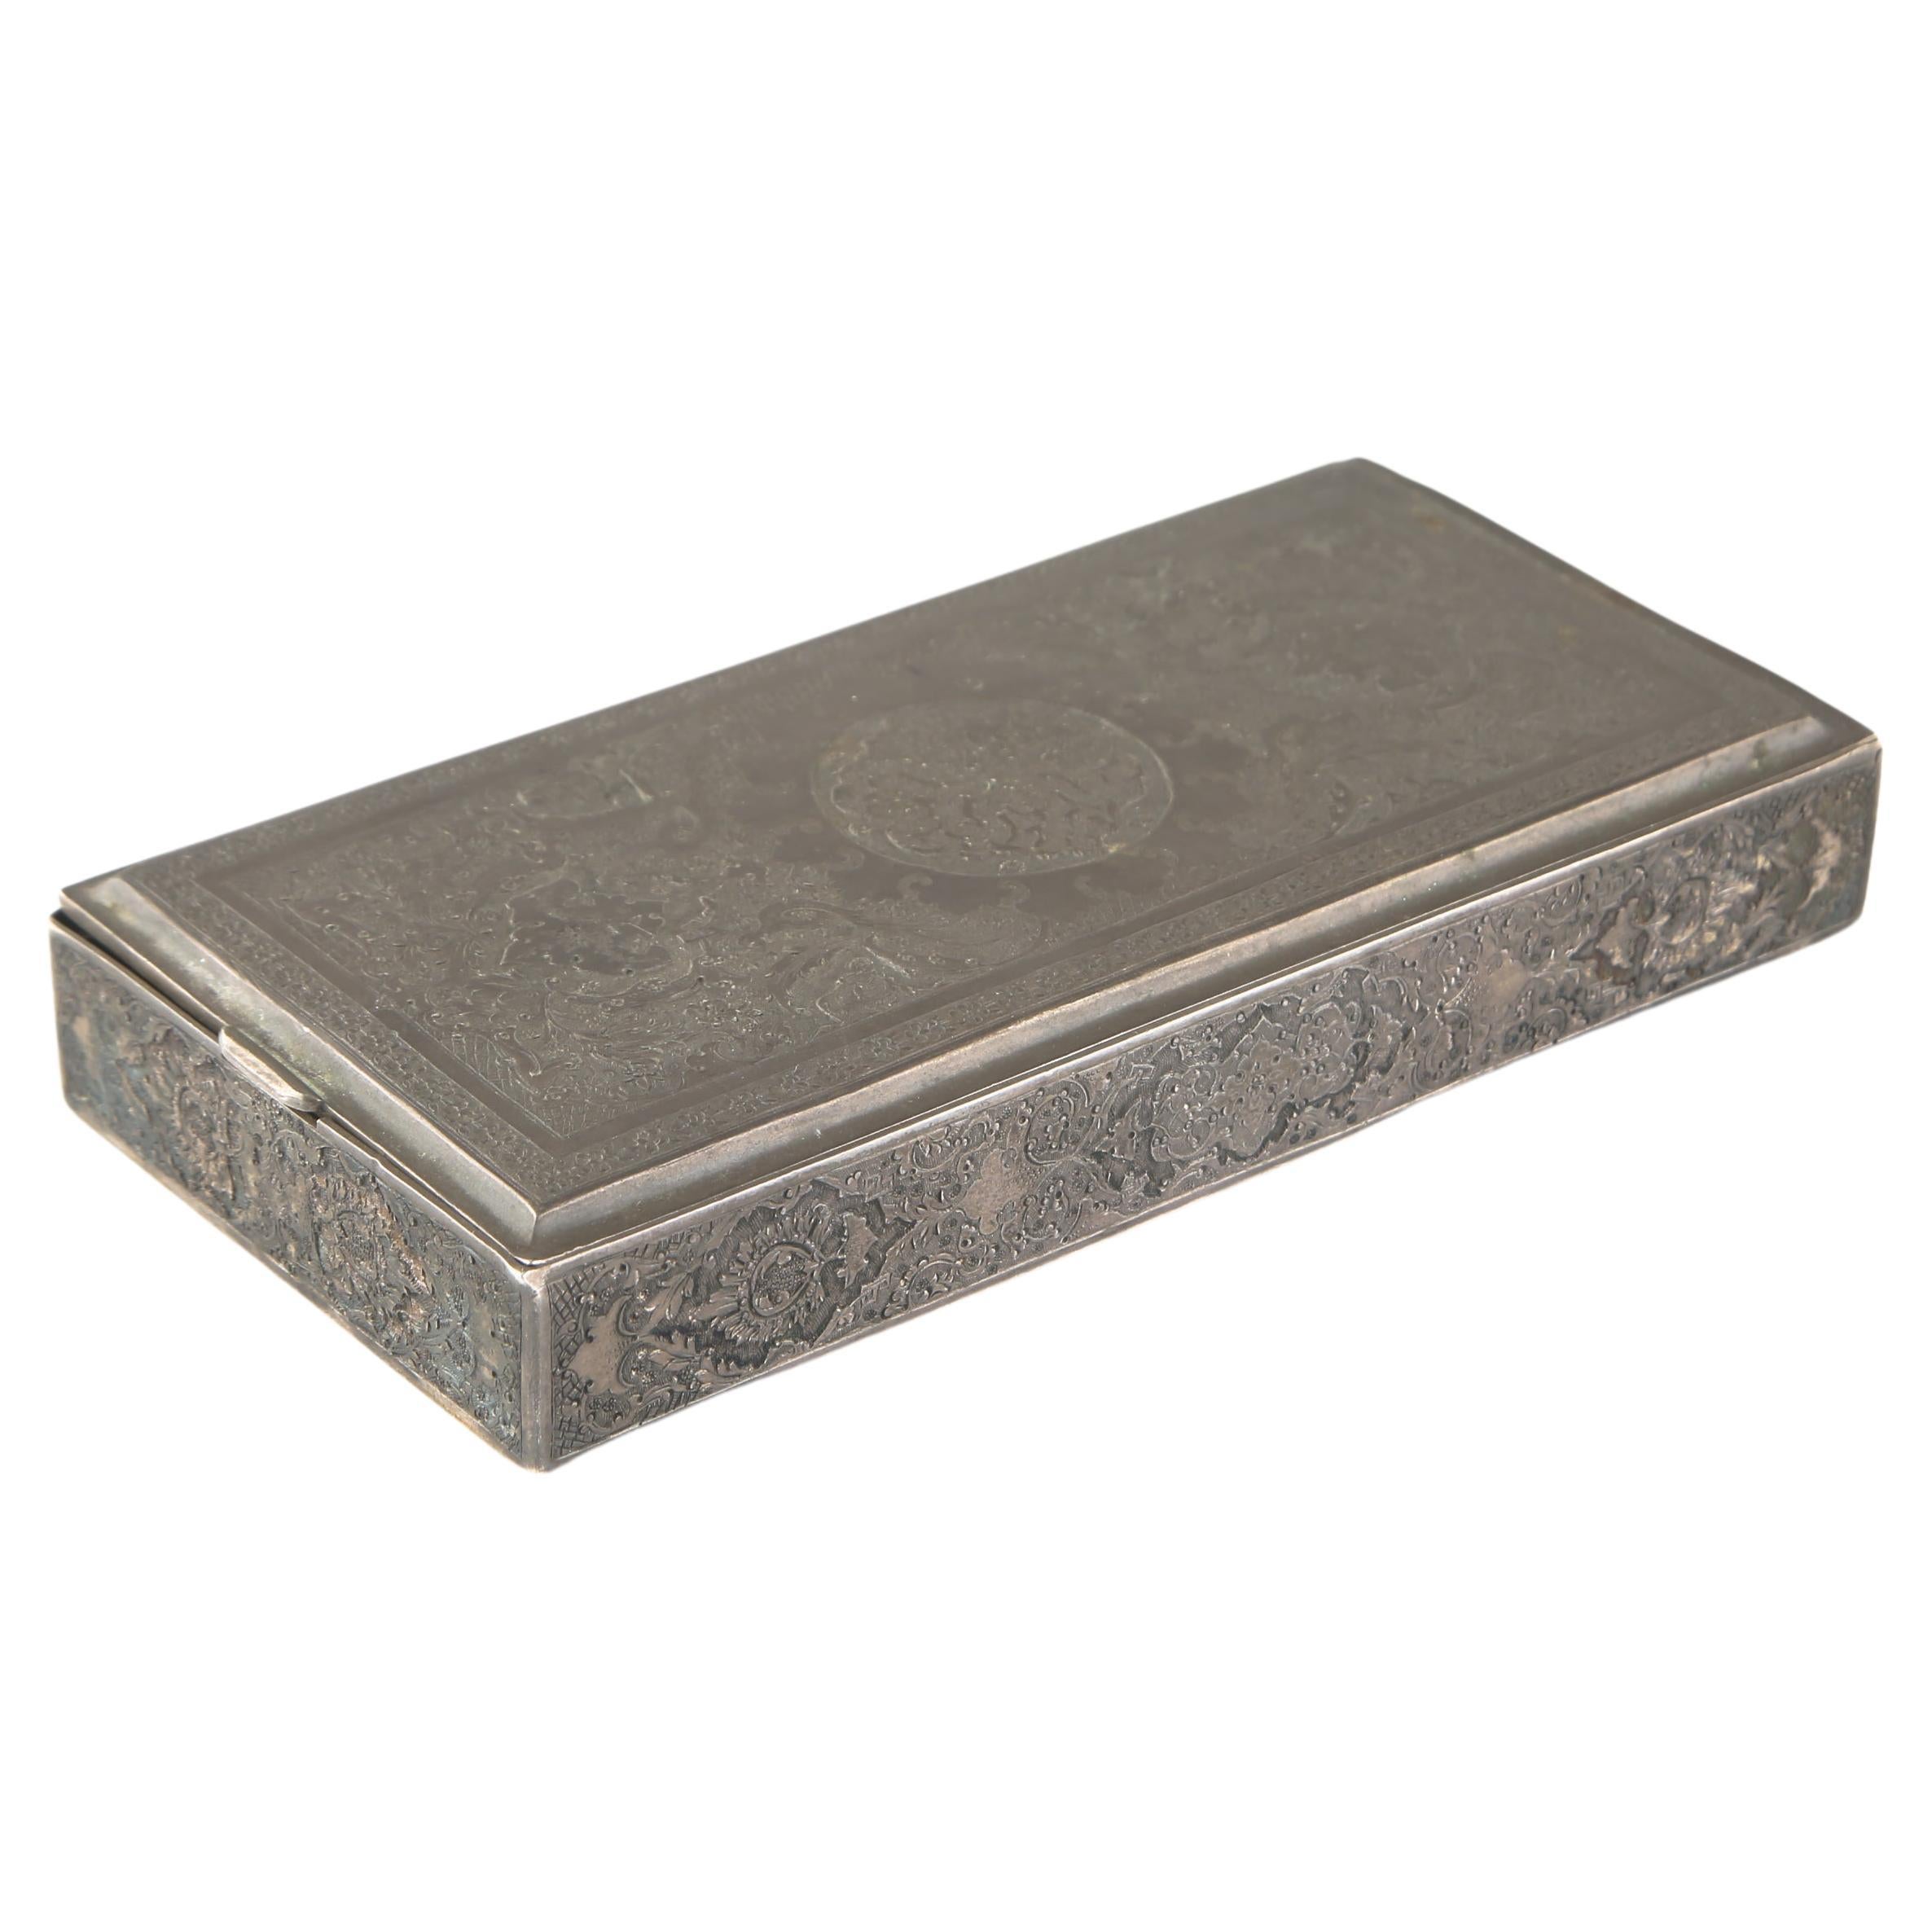 Beautiful Antique Persian Hinged Engraved Solid Silver Box - Hallmarked (275g)